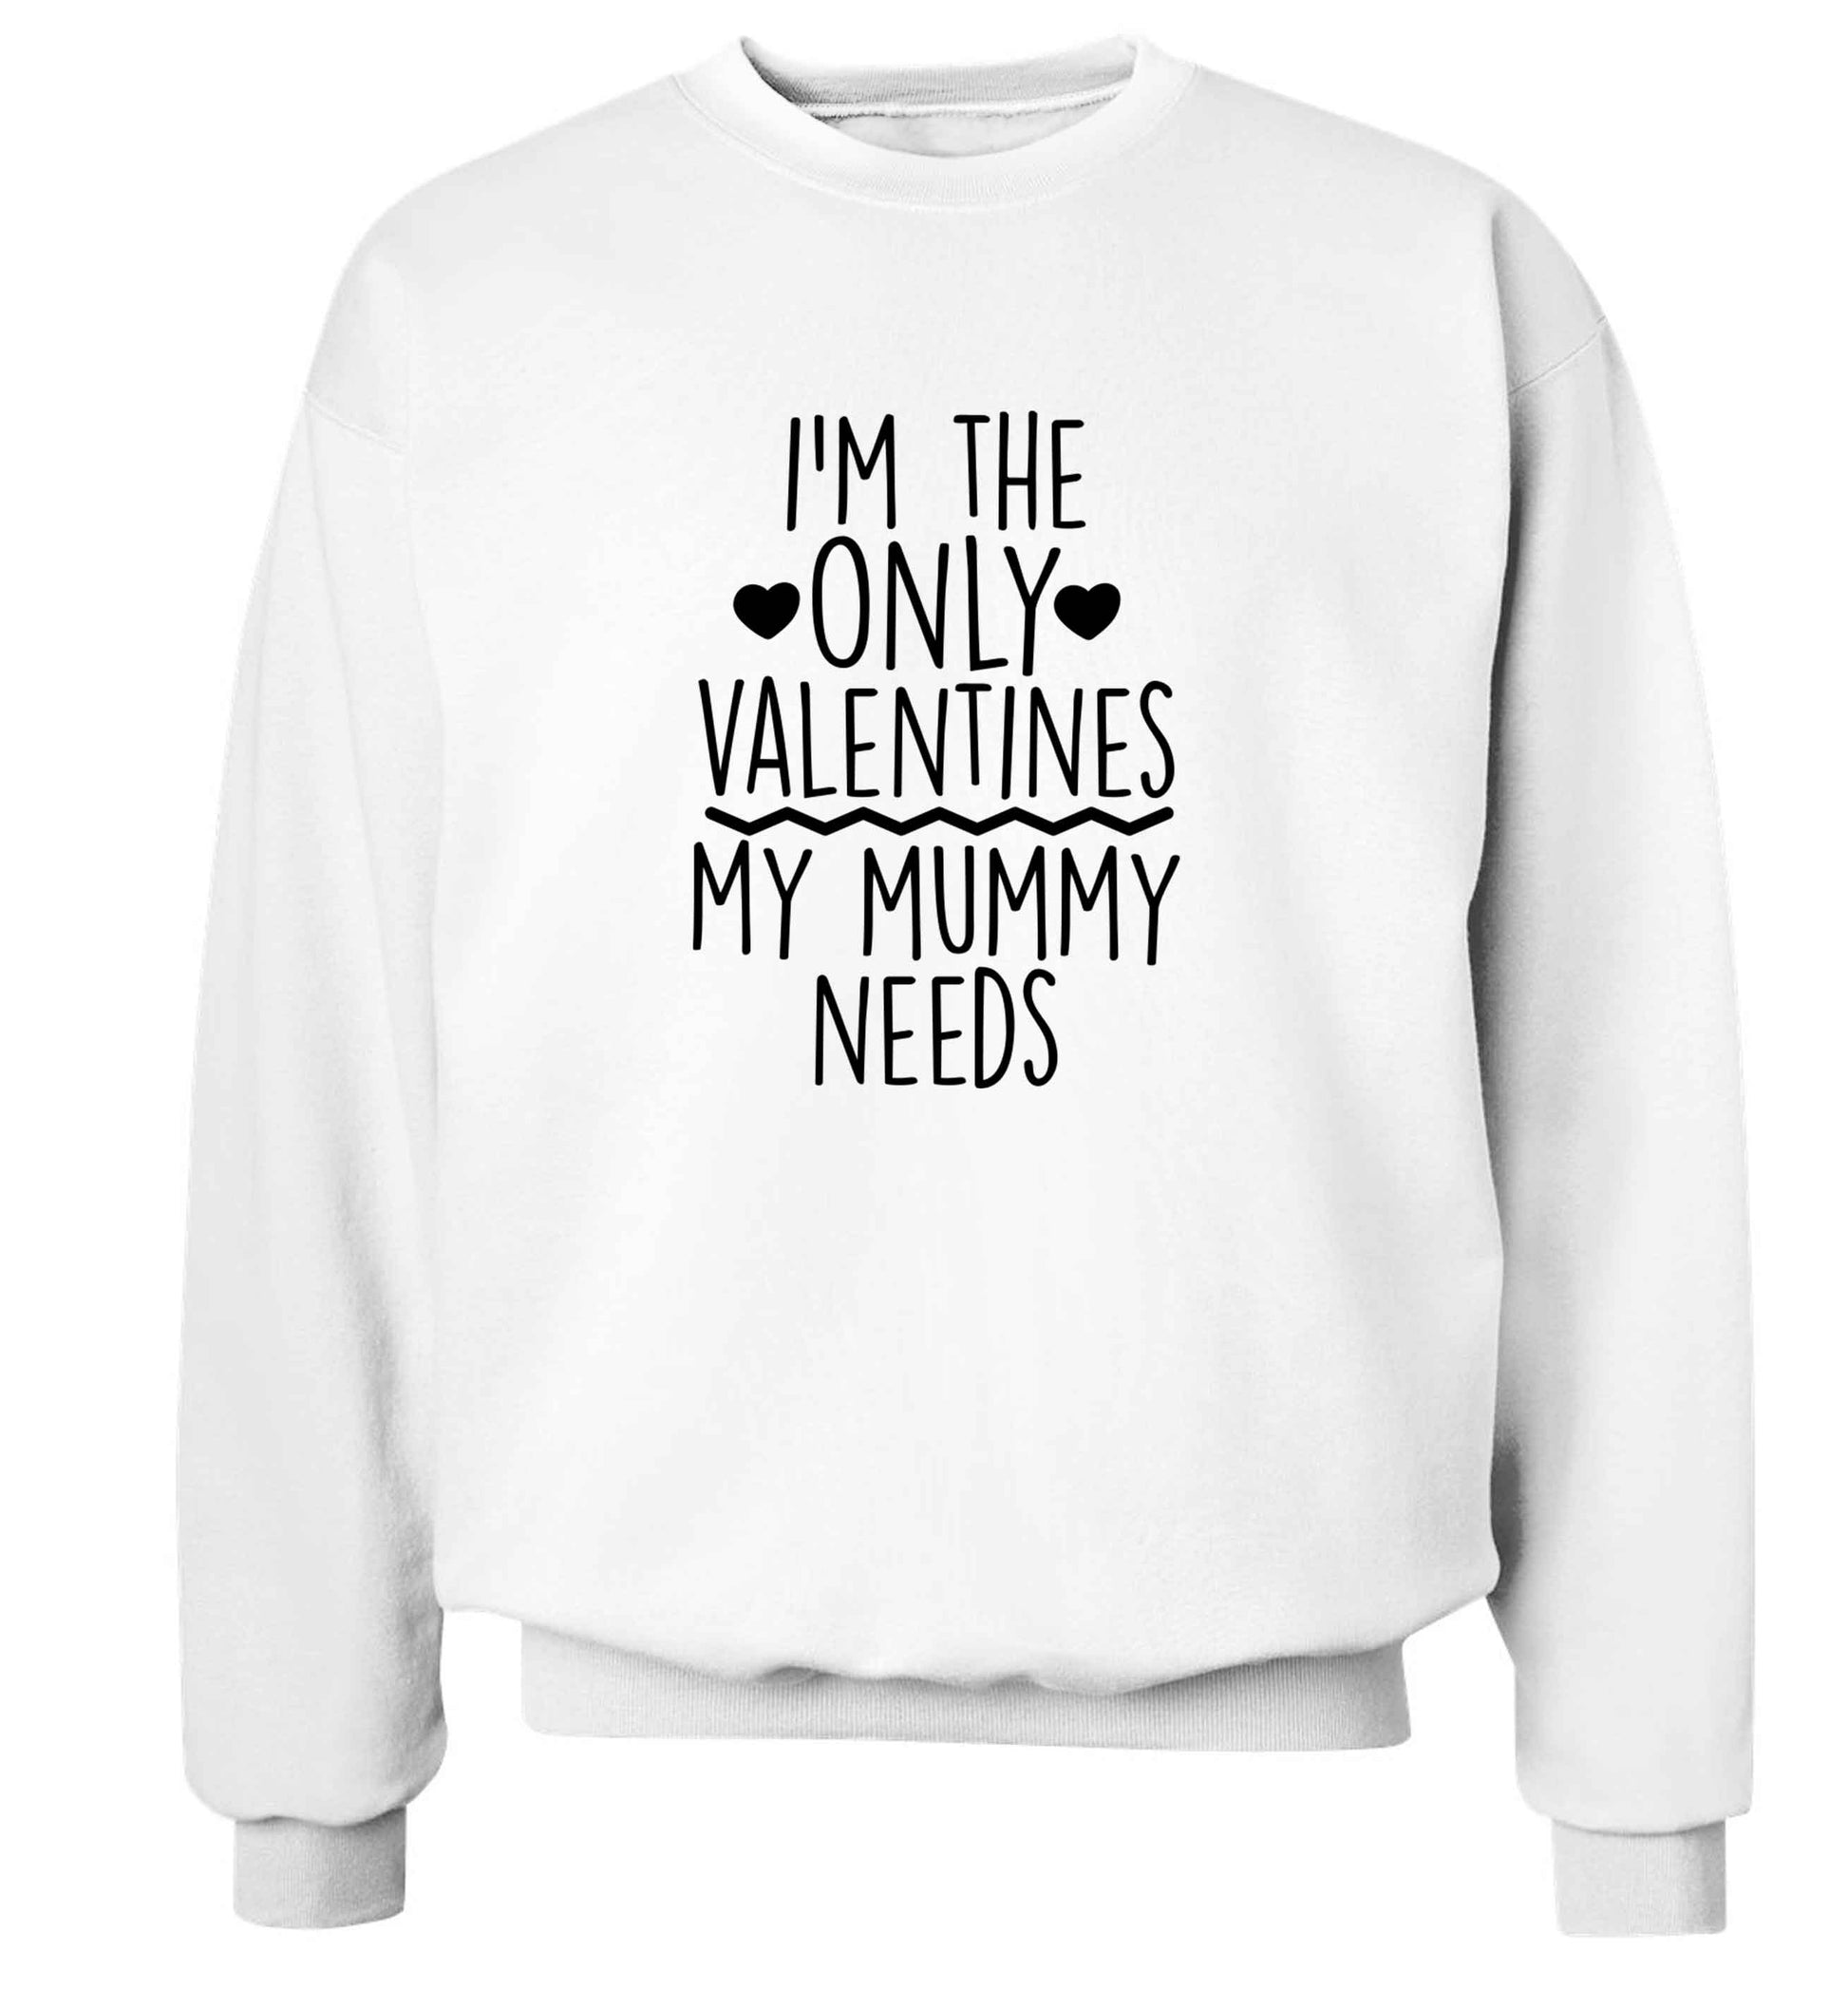 I'm the only valentines my mummy needs adult's unisex white sweater 2XL